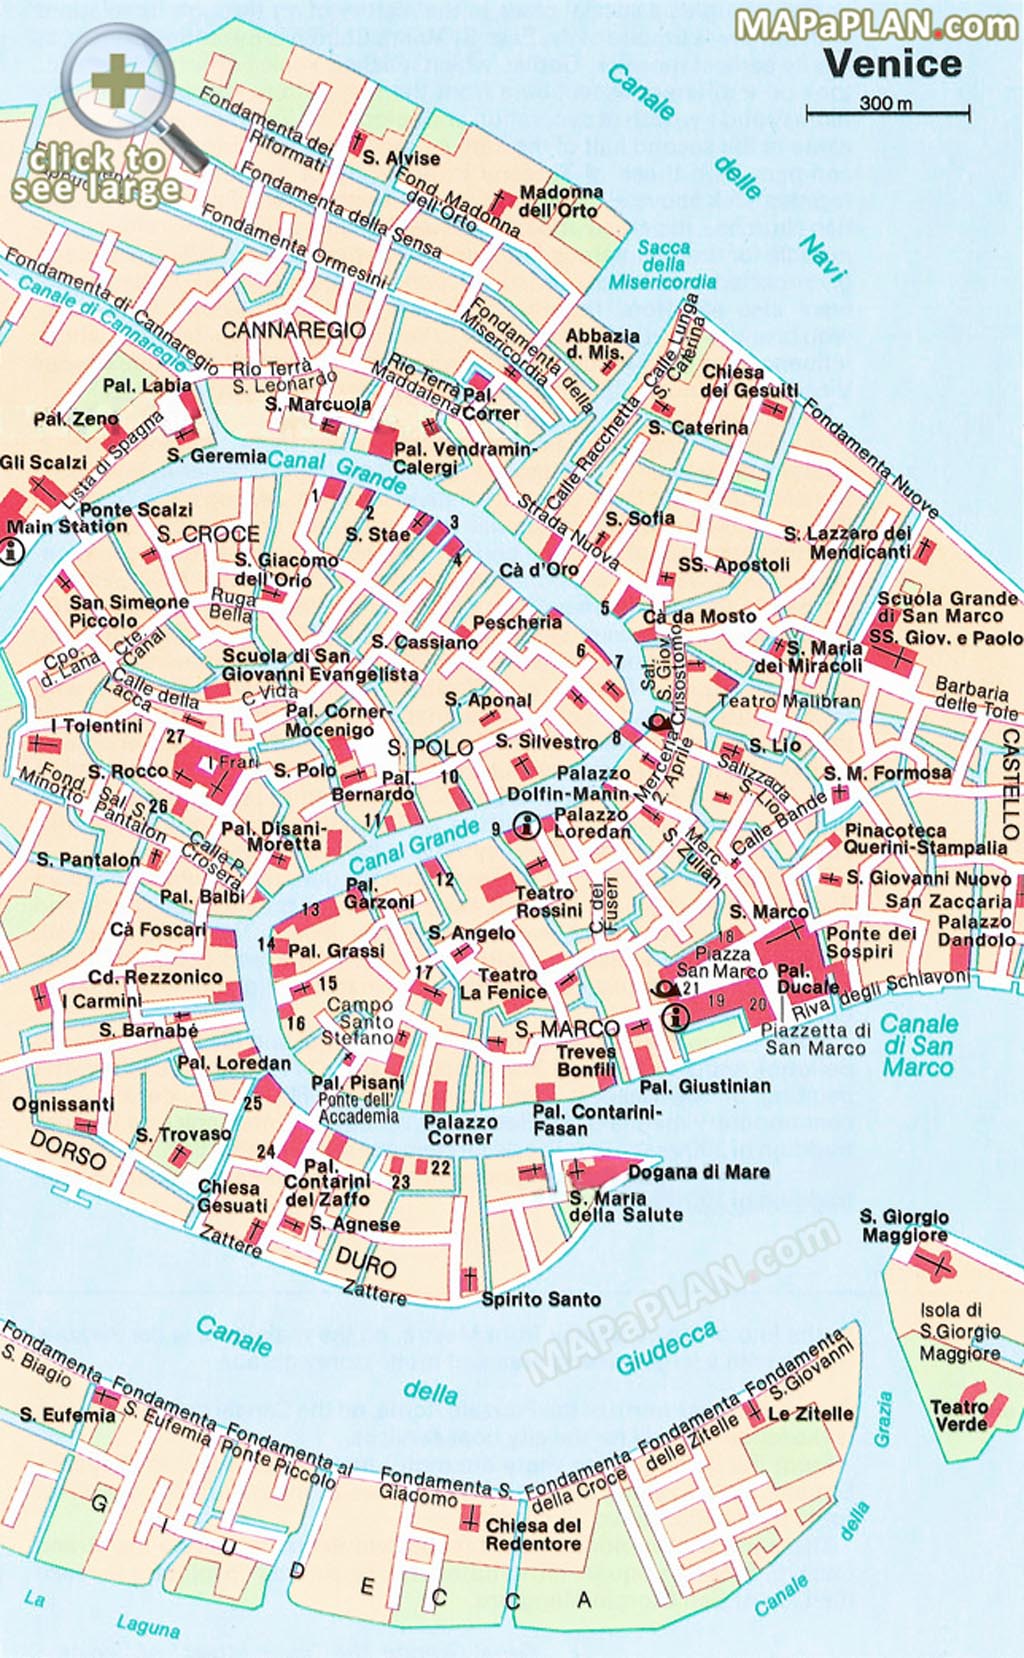 Venice maps - Top tourist attractions - Free, printable city street map ...